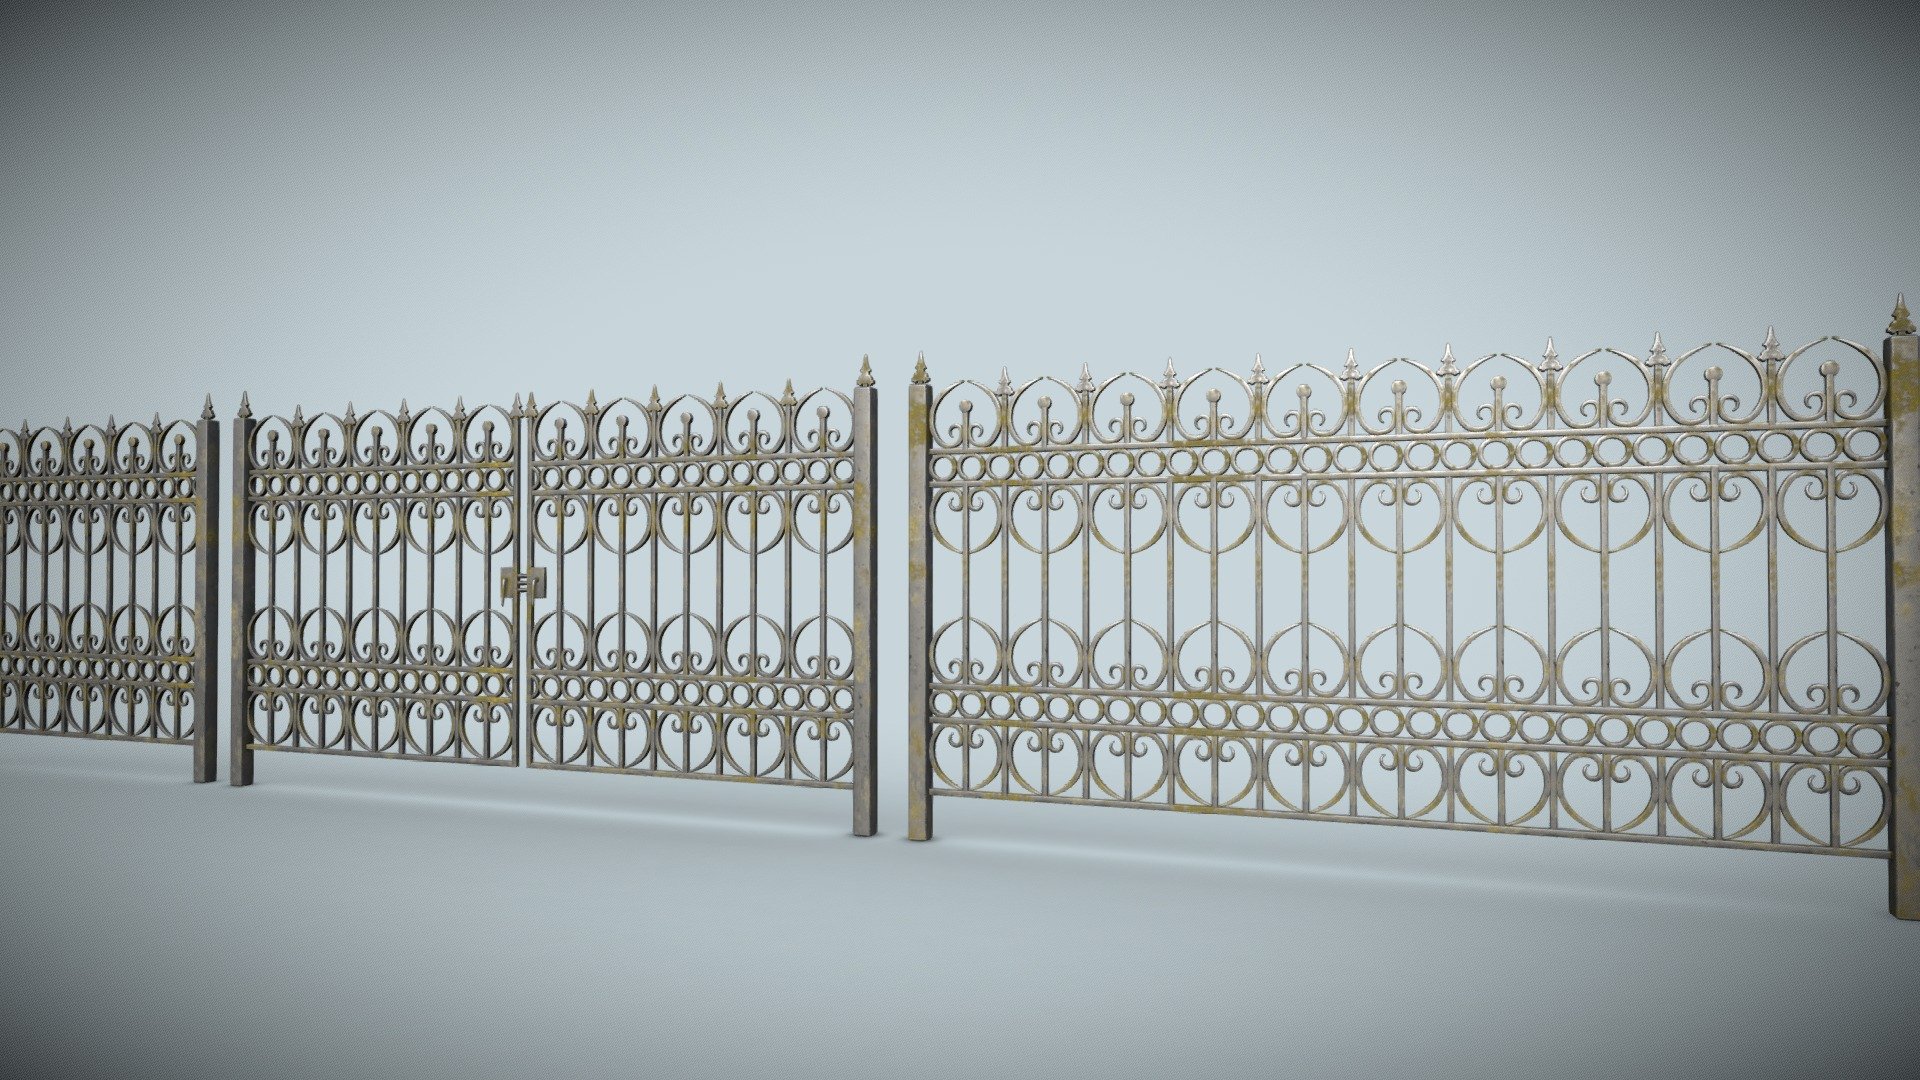 Gate and fence Metal Art JPEG PNG low-poly game ready 3D  Polygons 46706 Vertices 46299 half of a large section of fence Polygons 23645 Vertices 23444 two section gate Polygons 47682 Vertices 47275 - Gate and fence Metal Art low-poly game ready 3D - Buy Royalty Free 3D model by Svetlana07 3d model